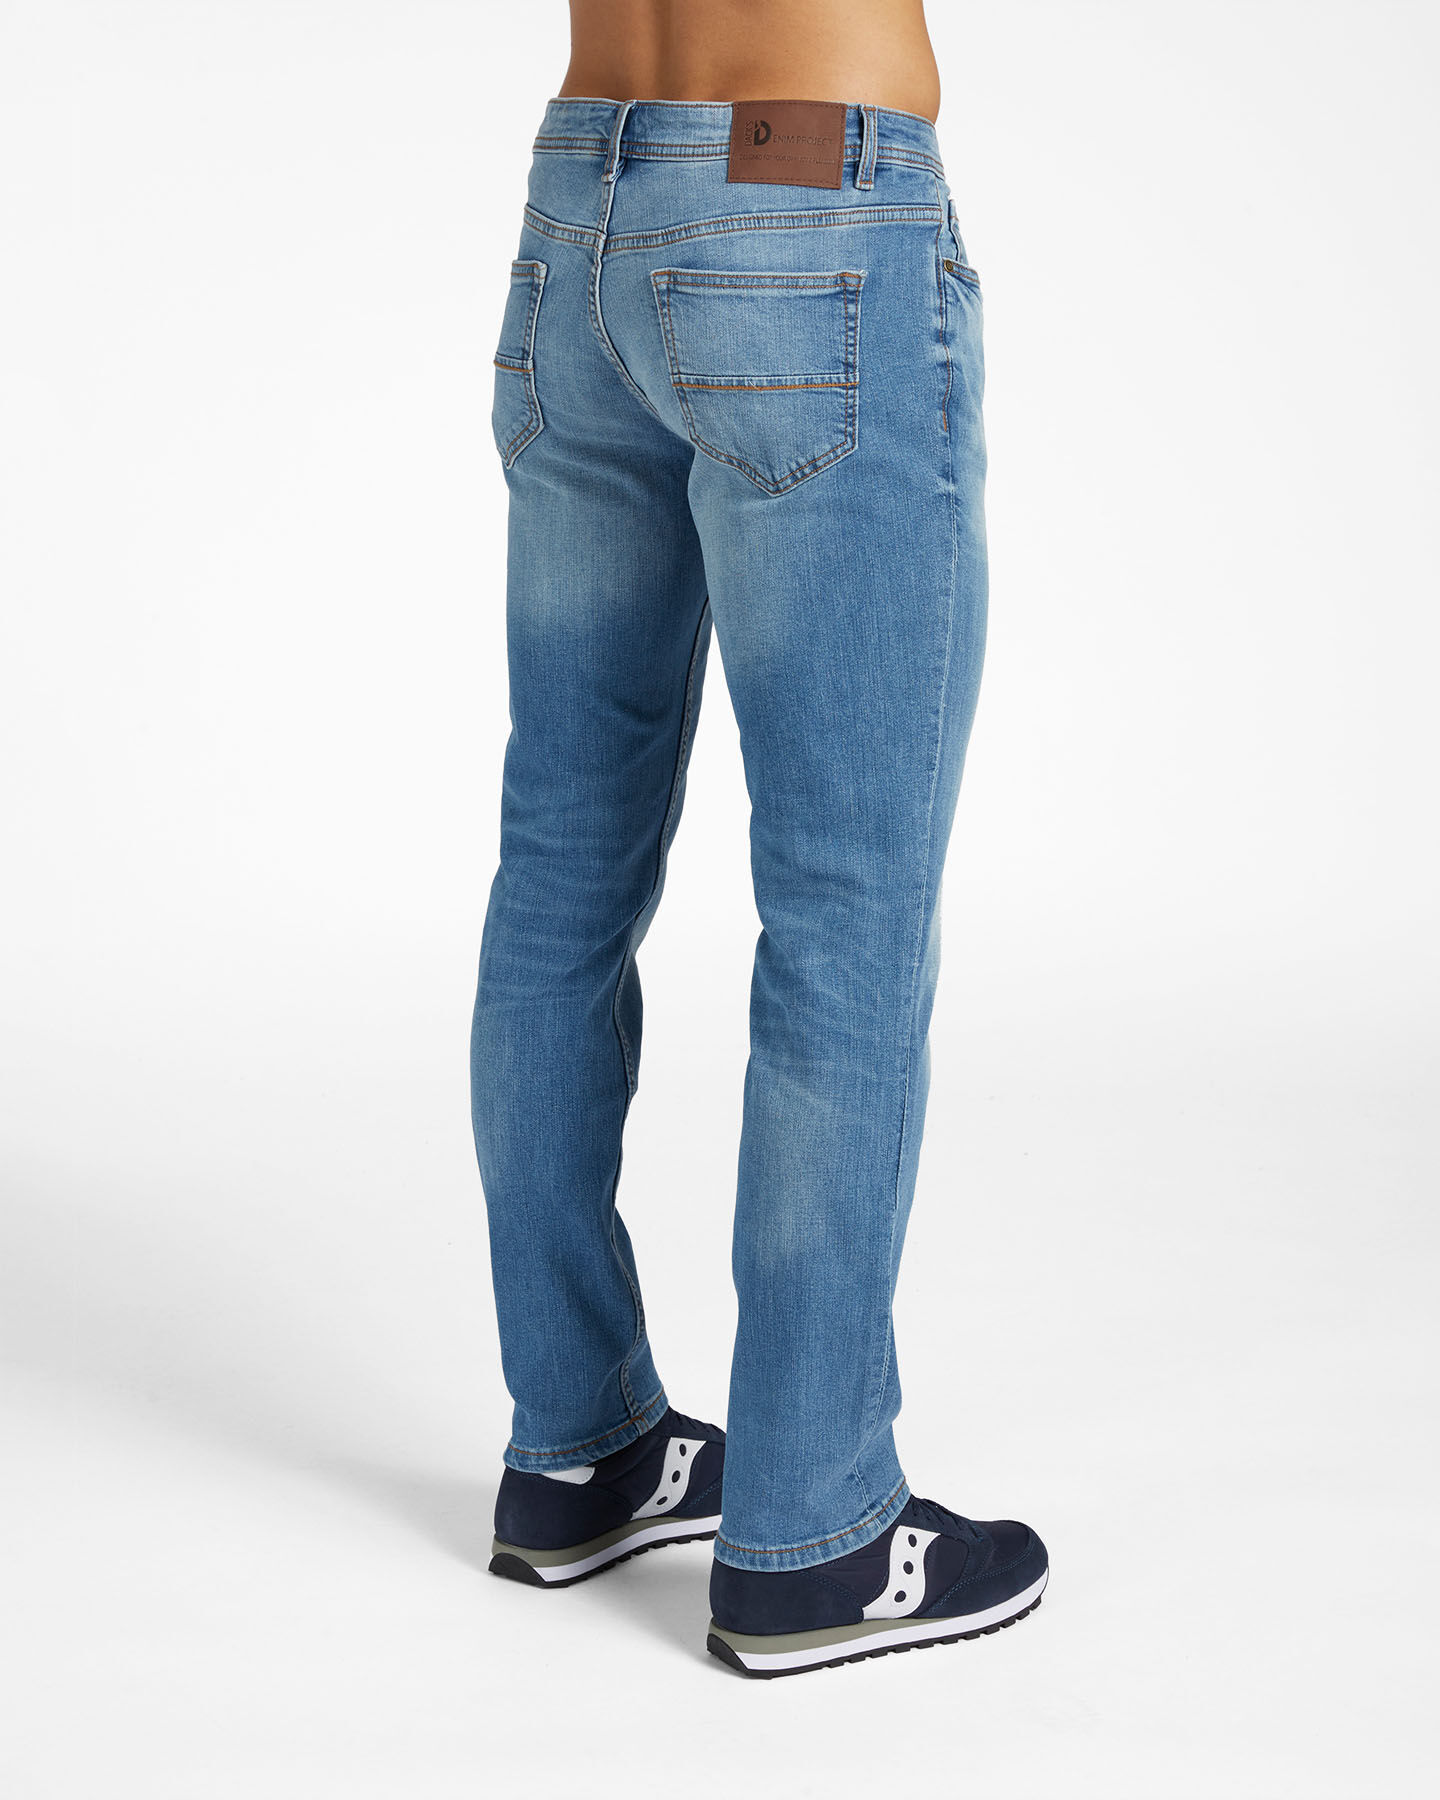  Jeans DACK'S CASUAL CITY M S4106779|MD|46 scatto 1